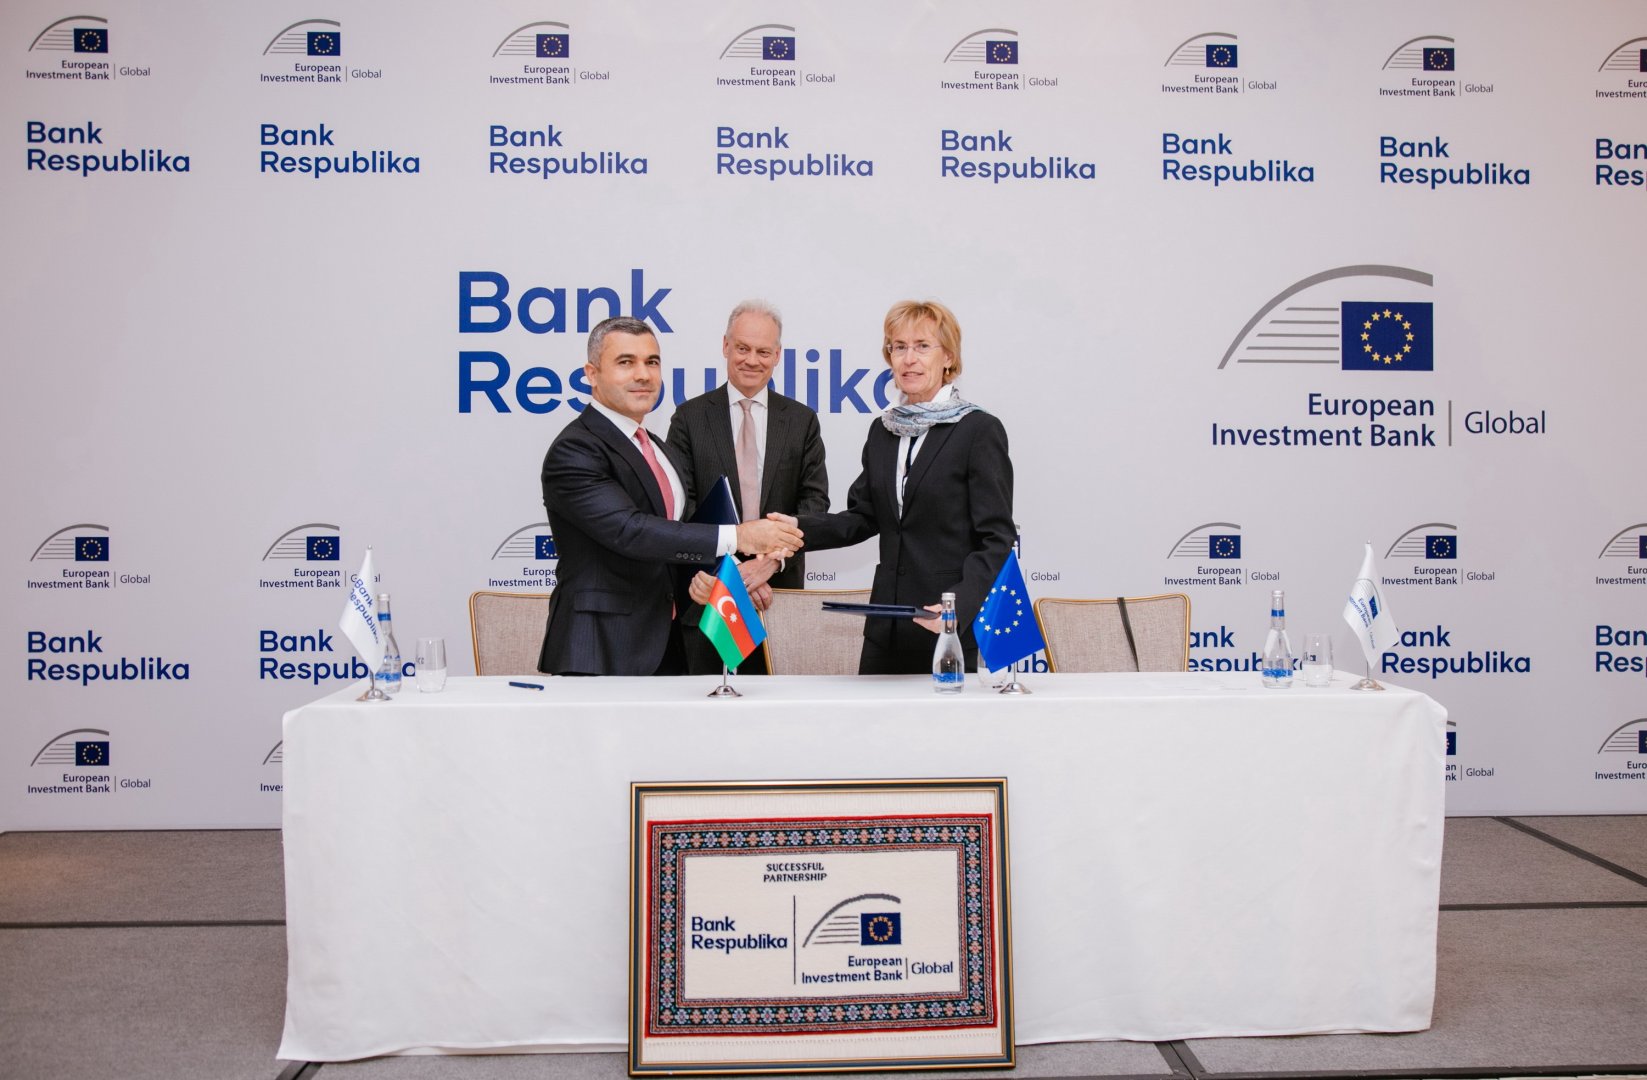 EIB Global and Bank Respublika signed a €10 million loan agreement to boost financial access for small businesses